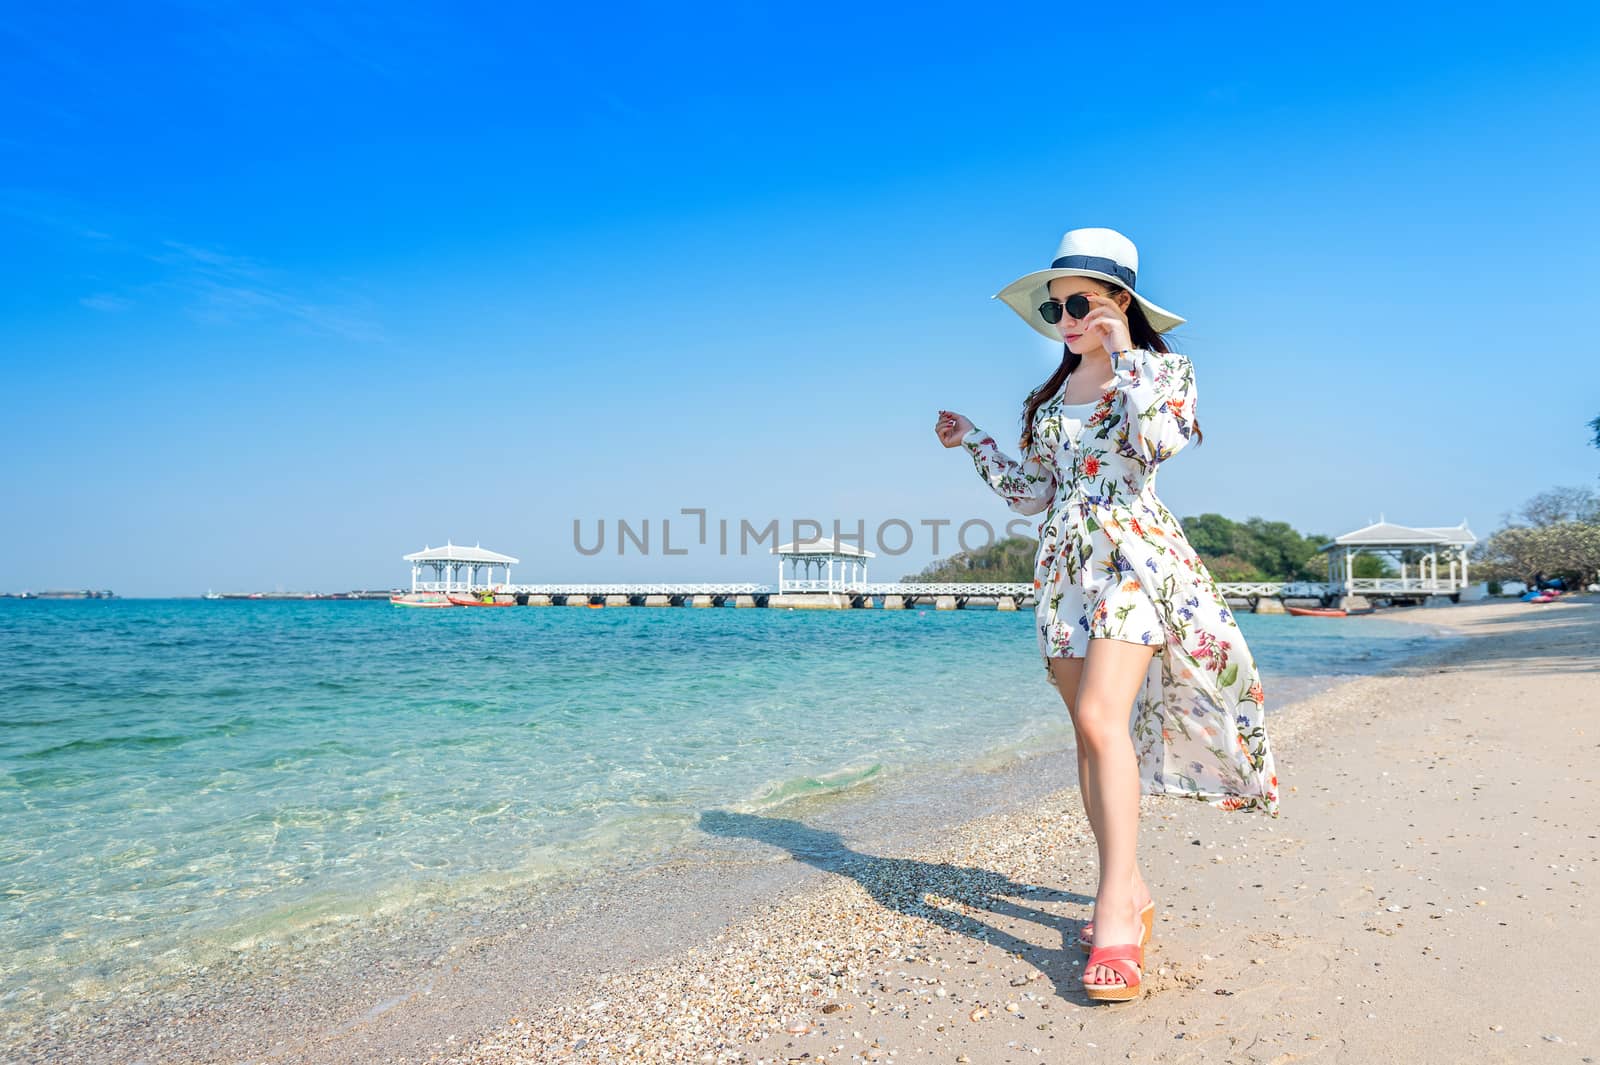 Young woman walking on beach in Si chang island, Thailand. by gutarphotoghaphy